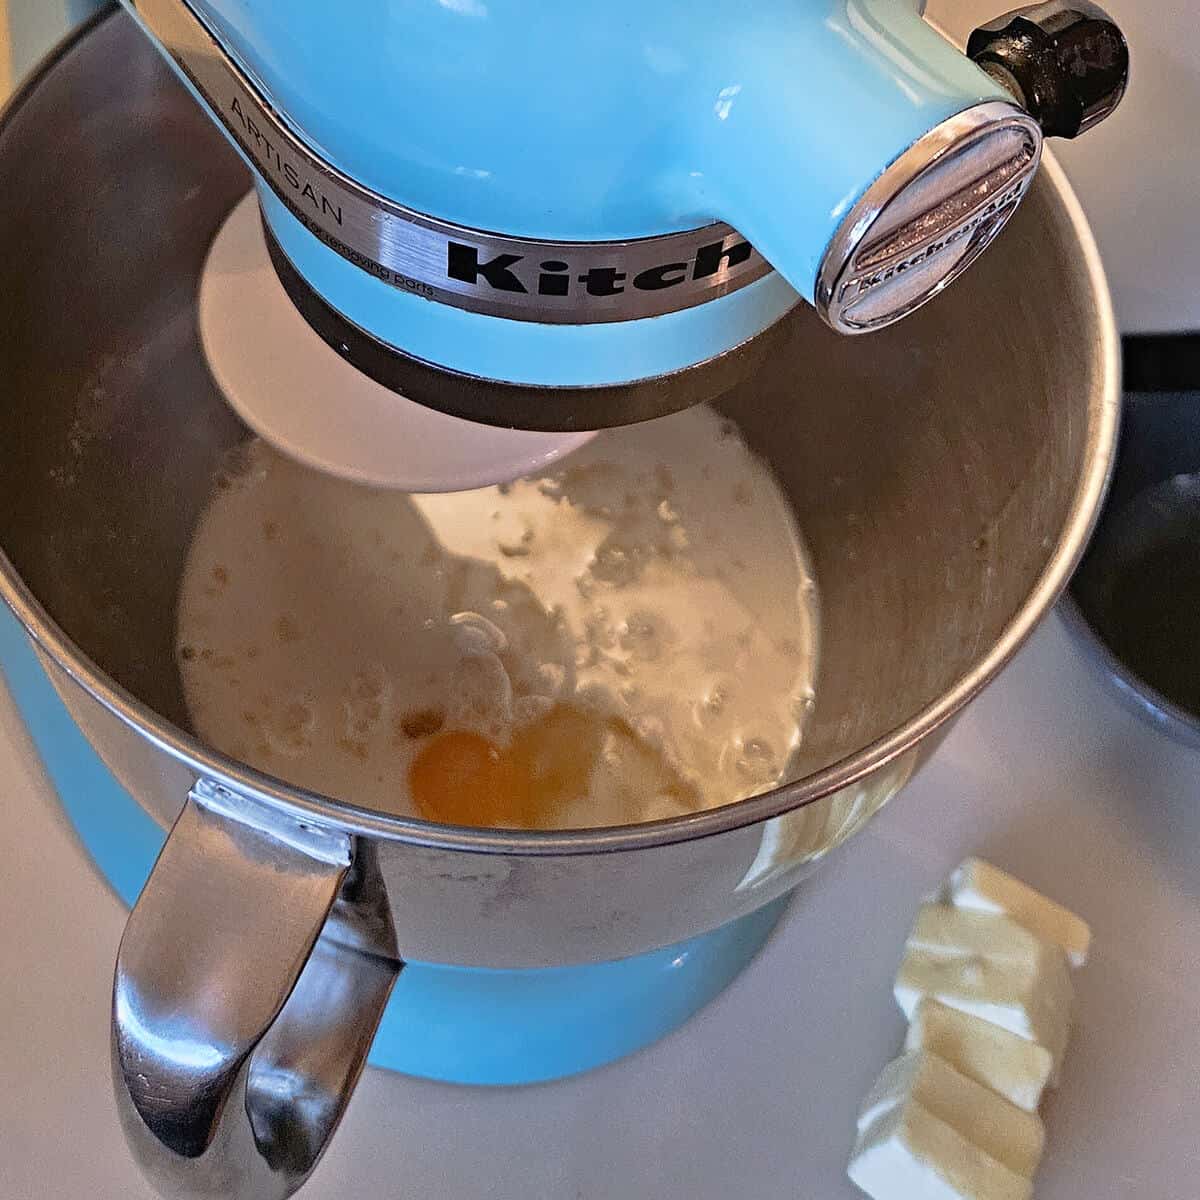 liquid ingredients shown in stand mixer bowl